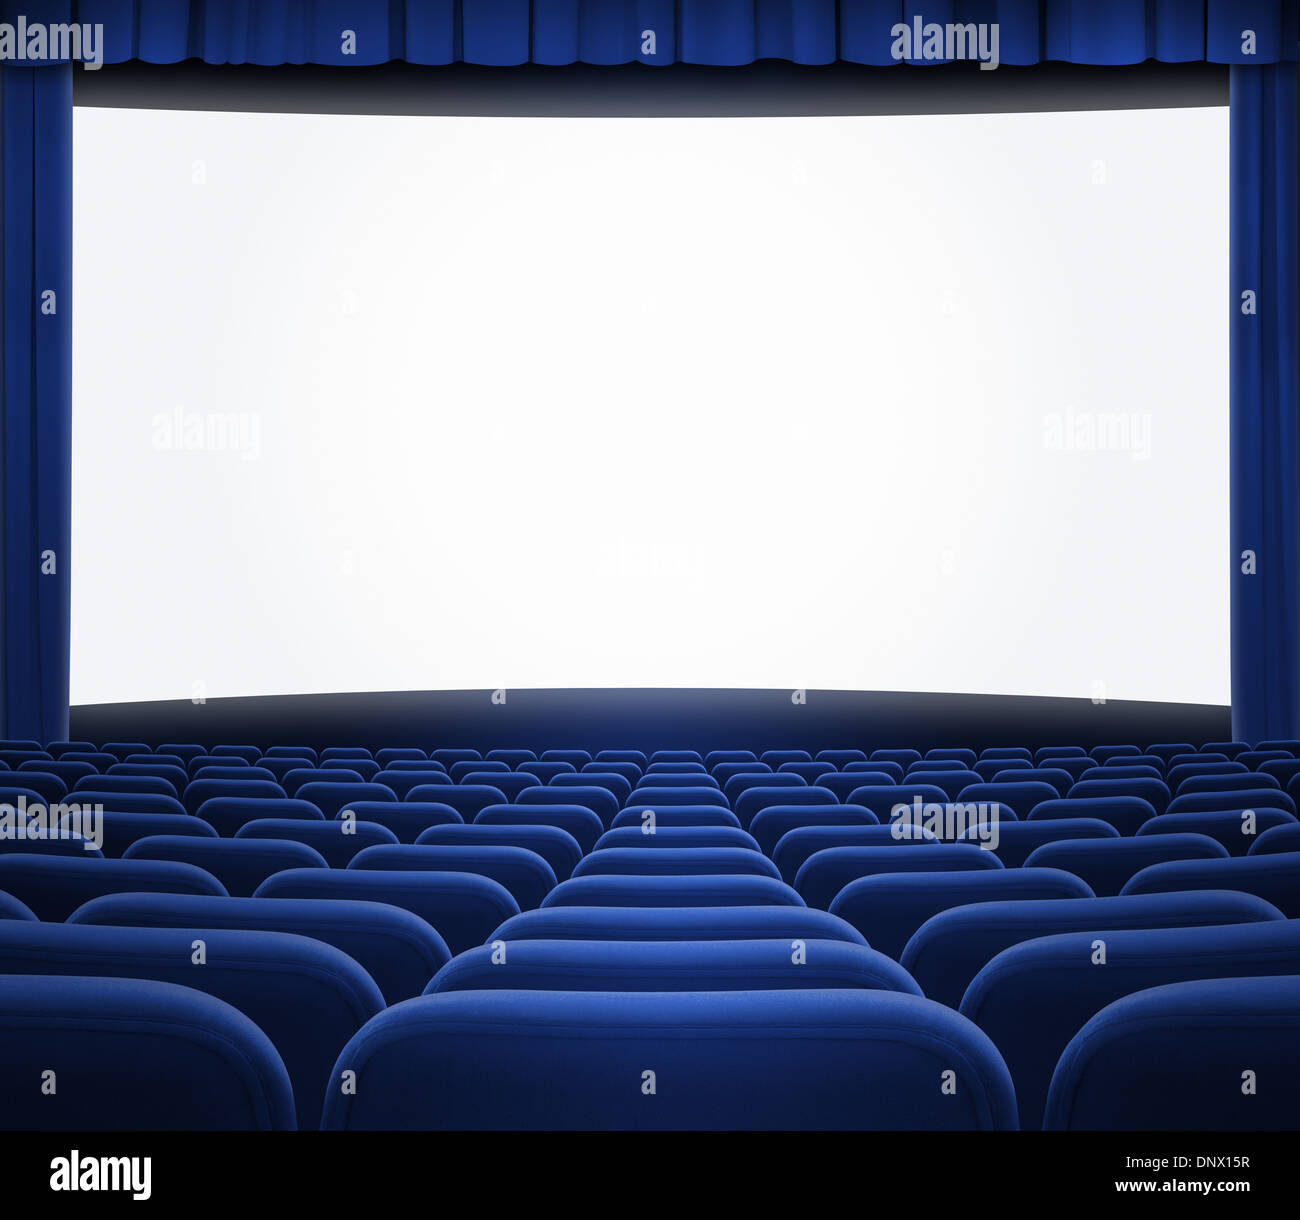 cinema screen with open blue curtain and seats Stock Photo